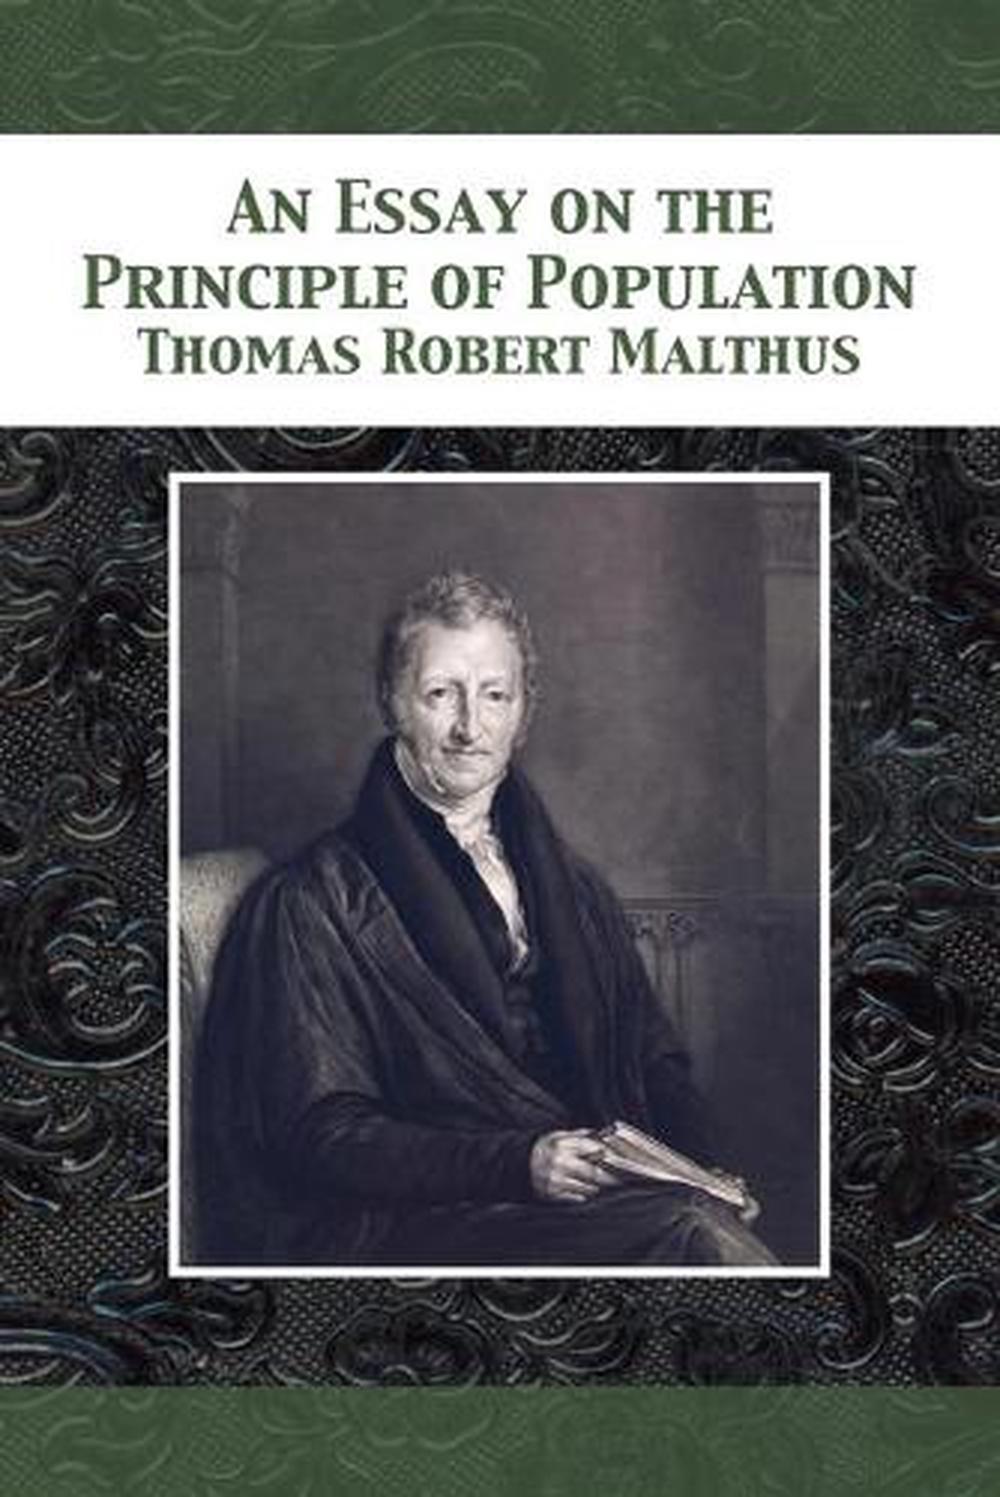 essay of the principle of population